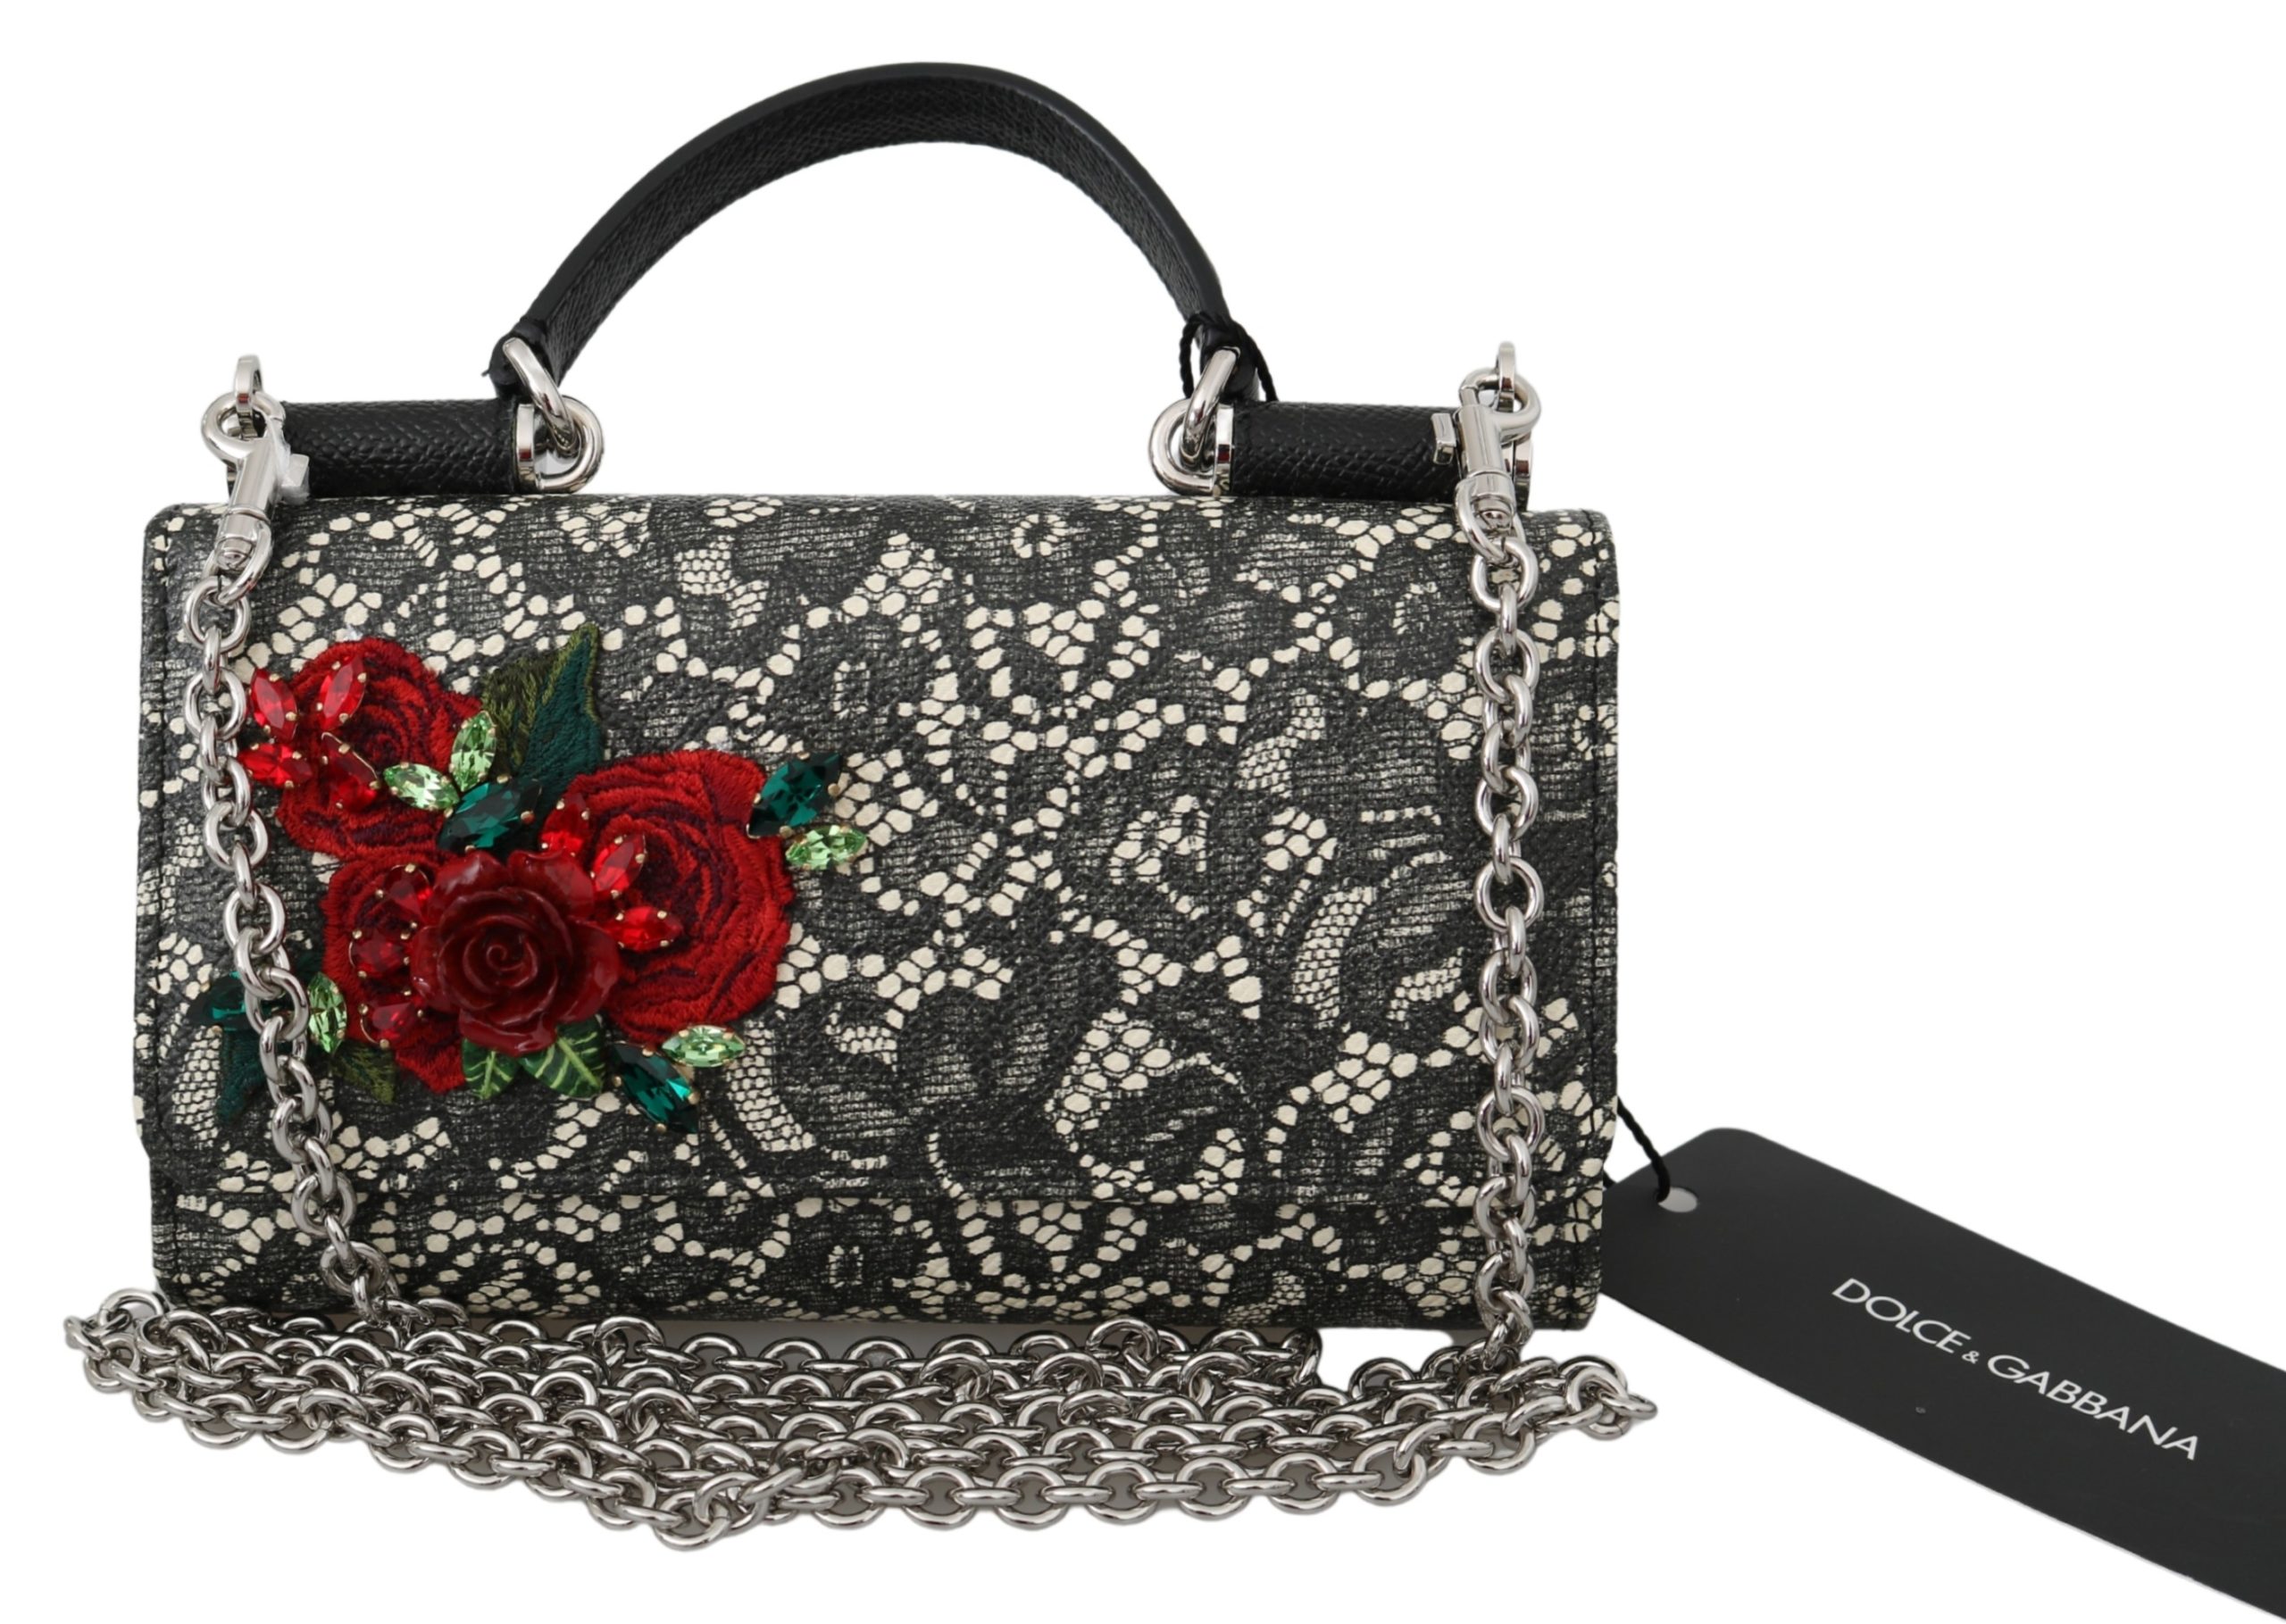 Lady Skeleton with Rose Black Gothic Lace Bag - Handbag Purse : Buy Online  at Best Price in KSA - Souq is now Amazon.sa: Fashion